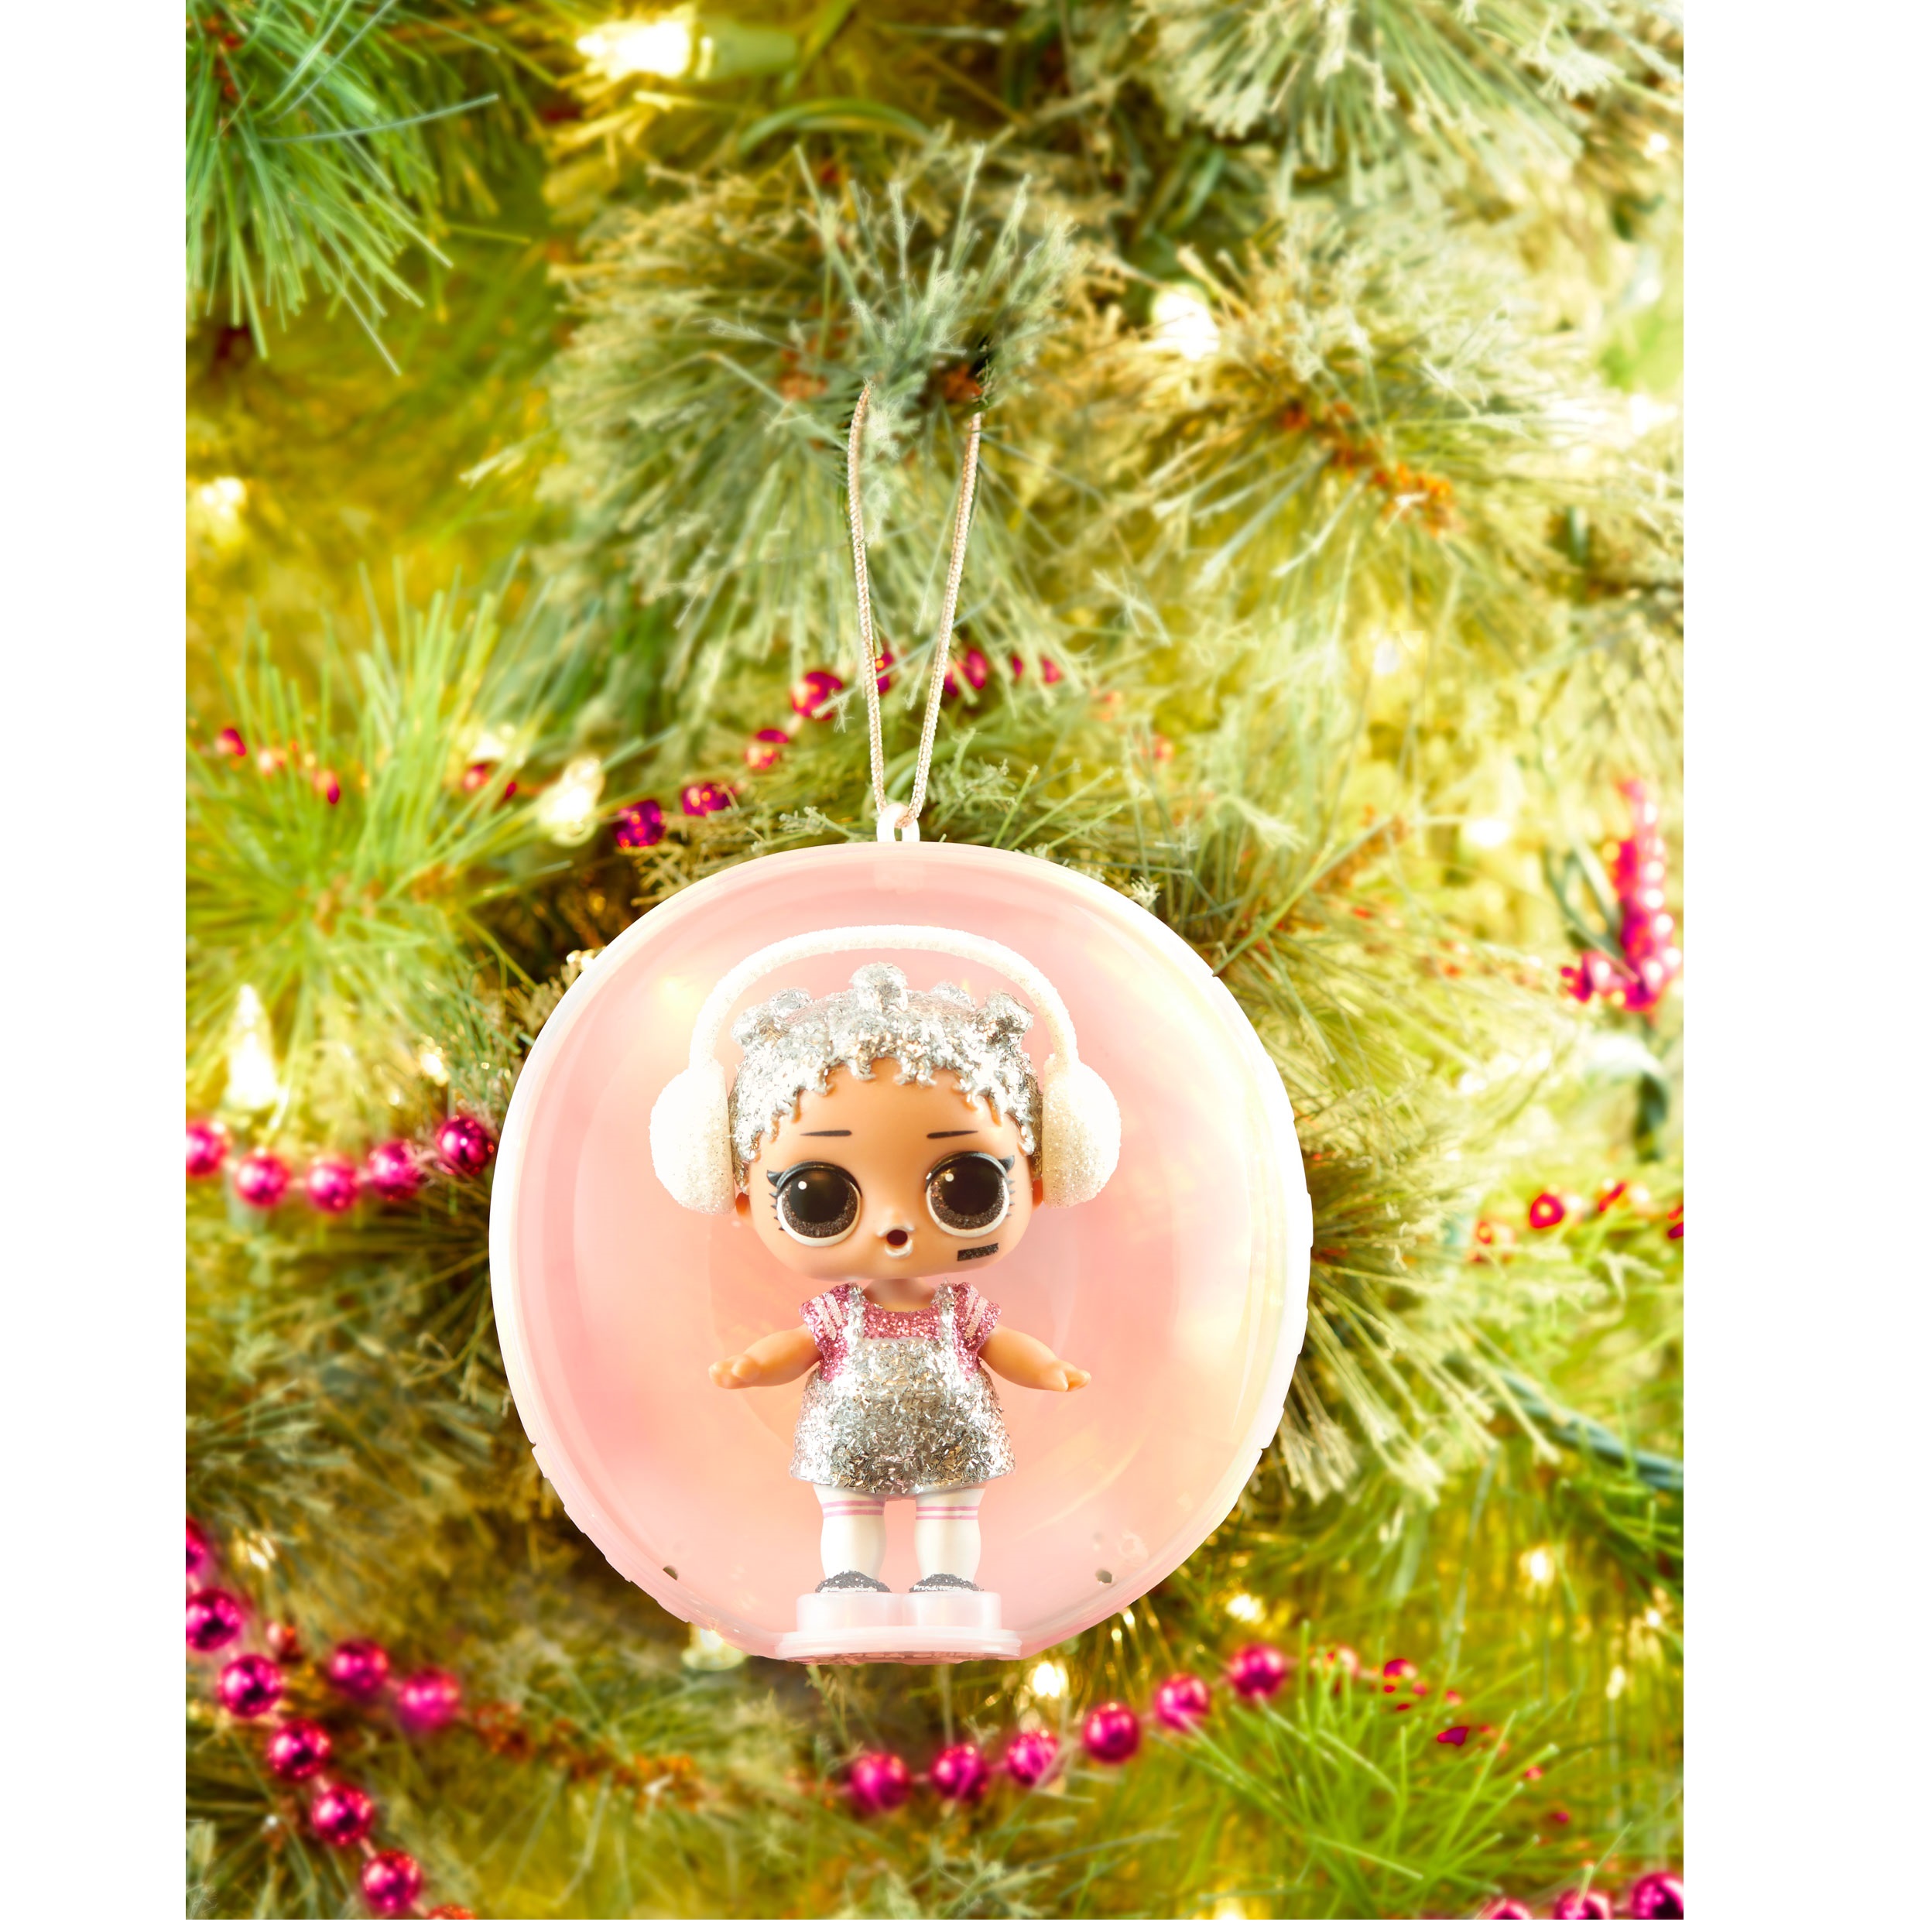 LOL Surprise Bling Series With Glitter Details & Doll Display, Great Gift for Kids Ages 4 5 6+ - image 5 of 5